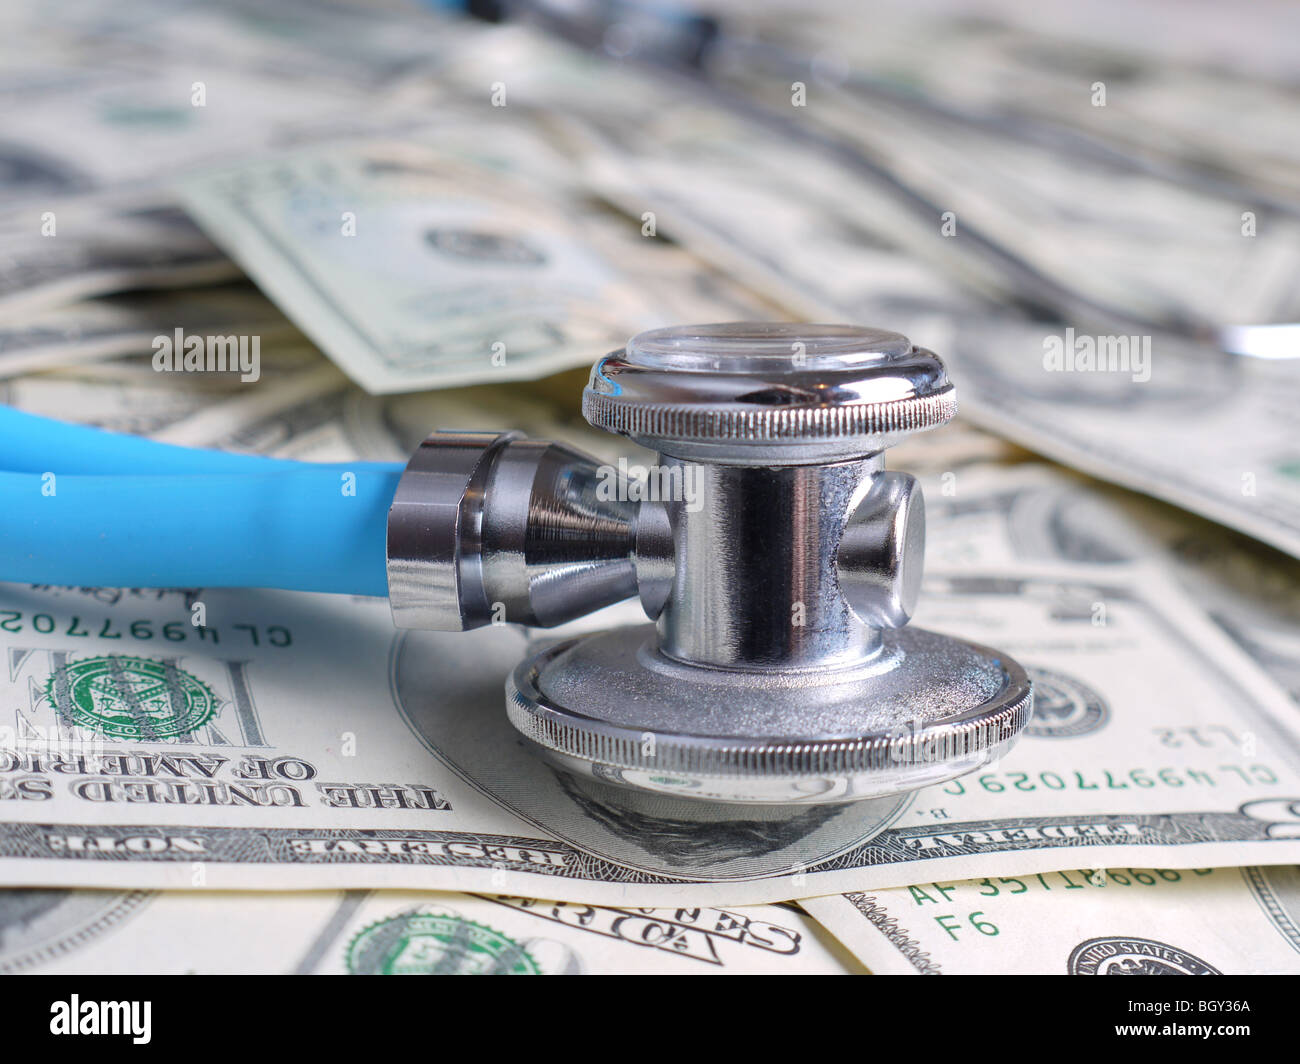 Stethoscope on pile of american dollar banknotes Stock Photo